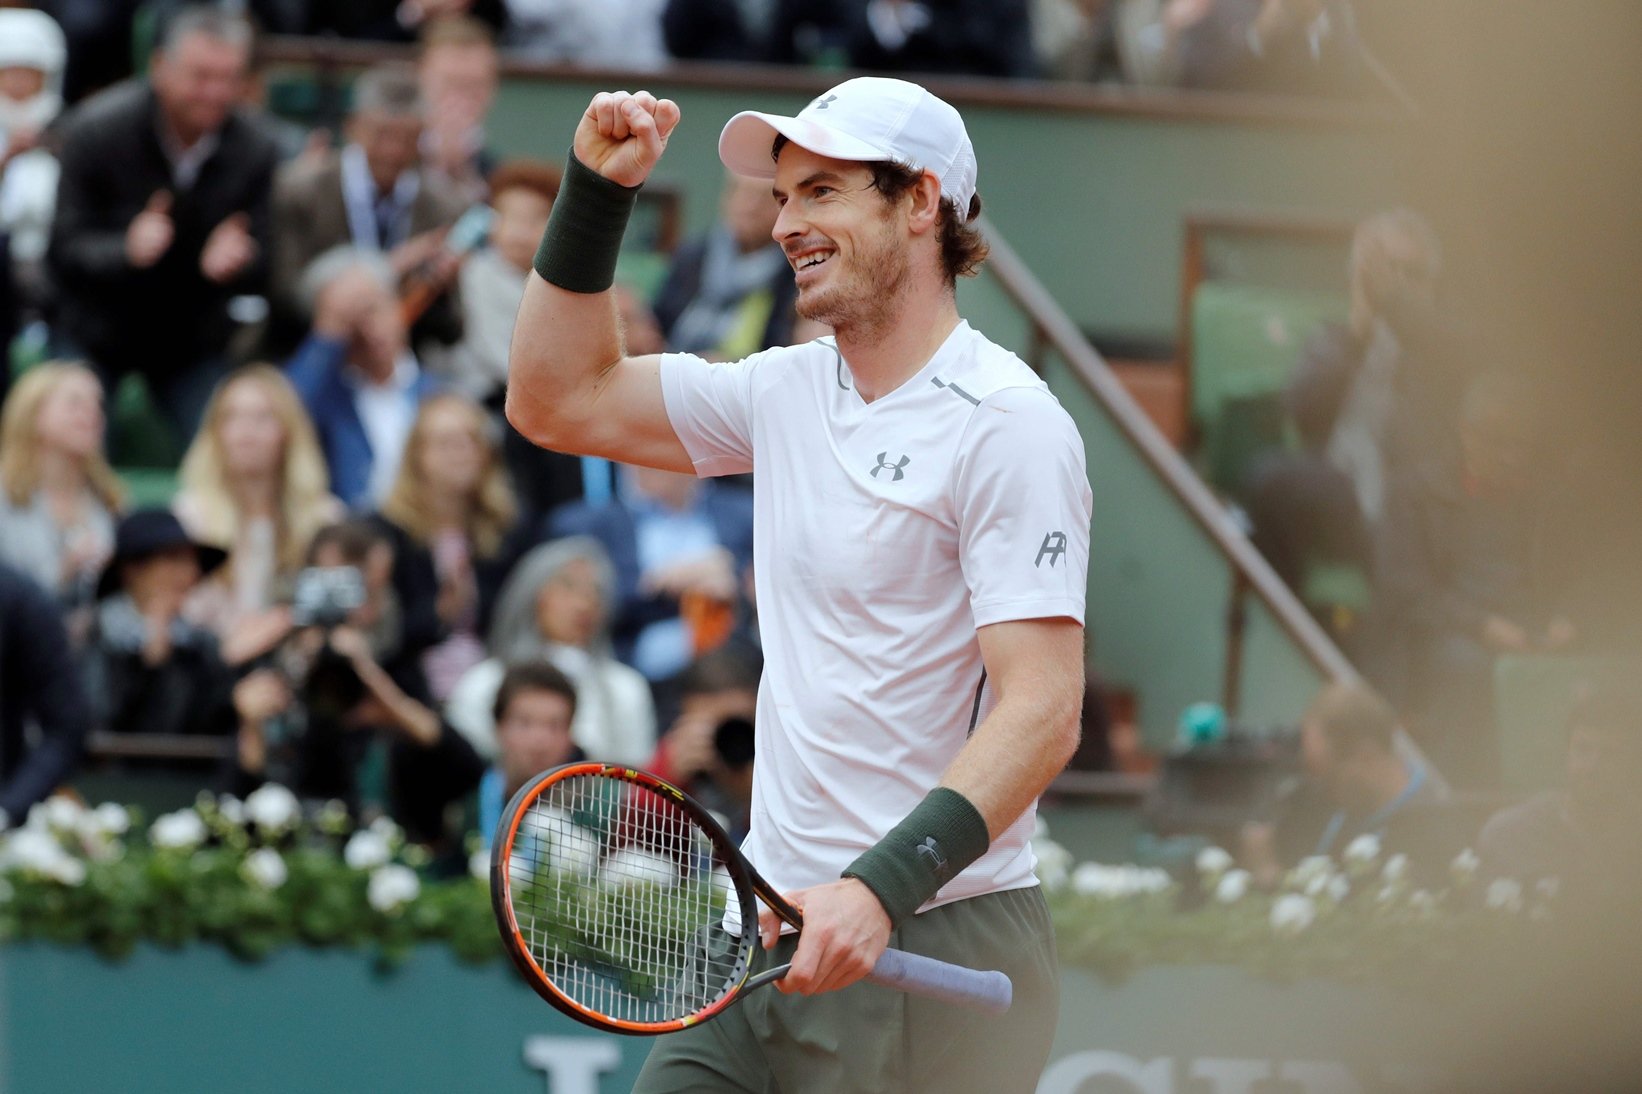 britain 039 s andy murray celebrates after winning his men 039 s semi final match against switzerland 039 s stanislas wawrinka at the roland garros 2016 french tennis open in paris on june 3 2016 photo afp